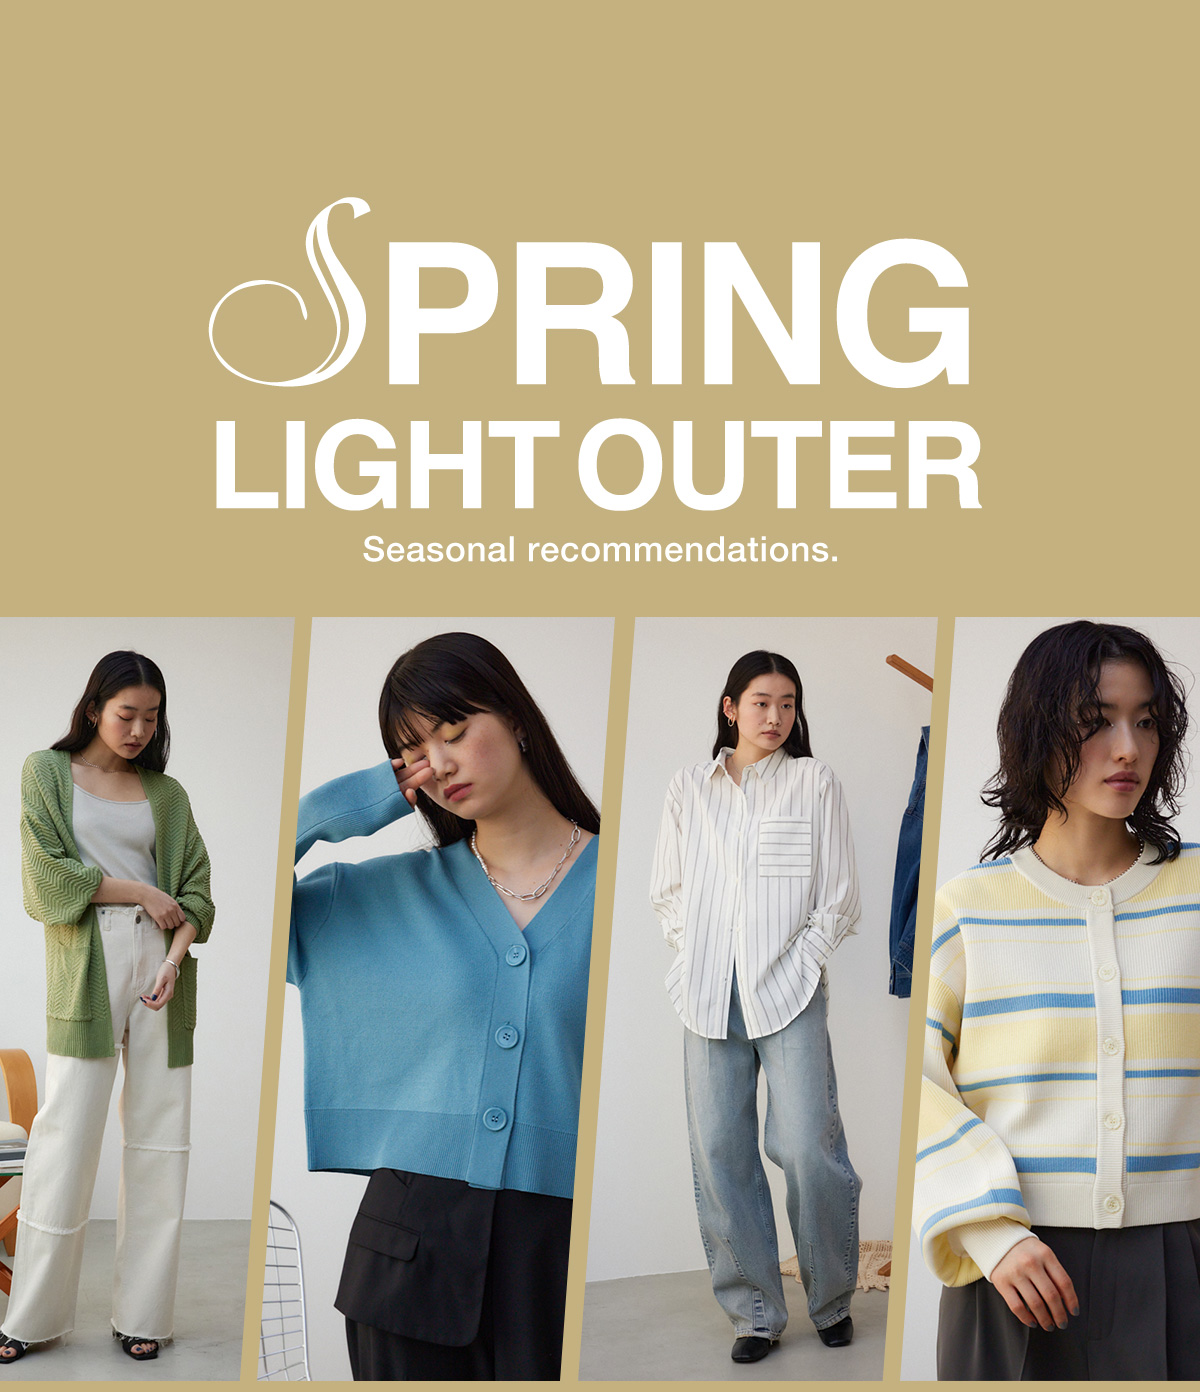 SPRING LIGHT OUTER Seasonal recommendations．For WOMEN